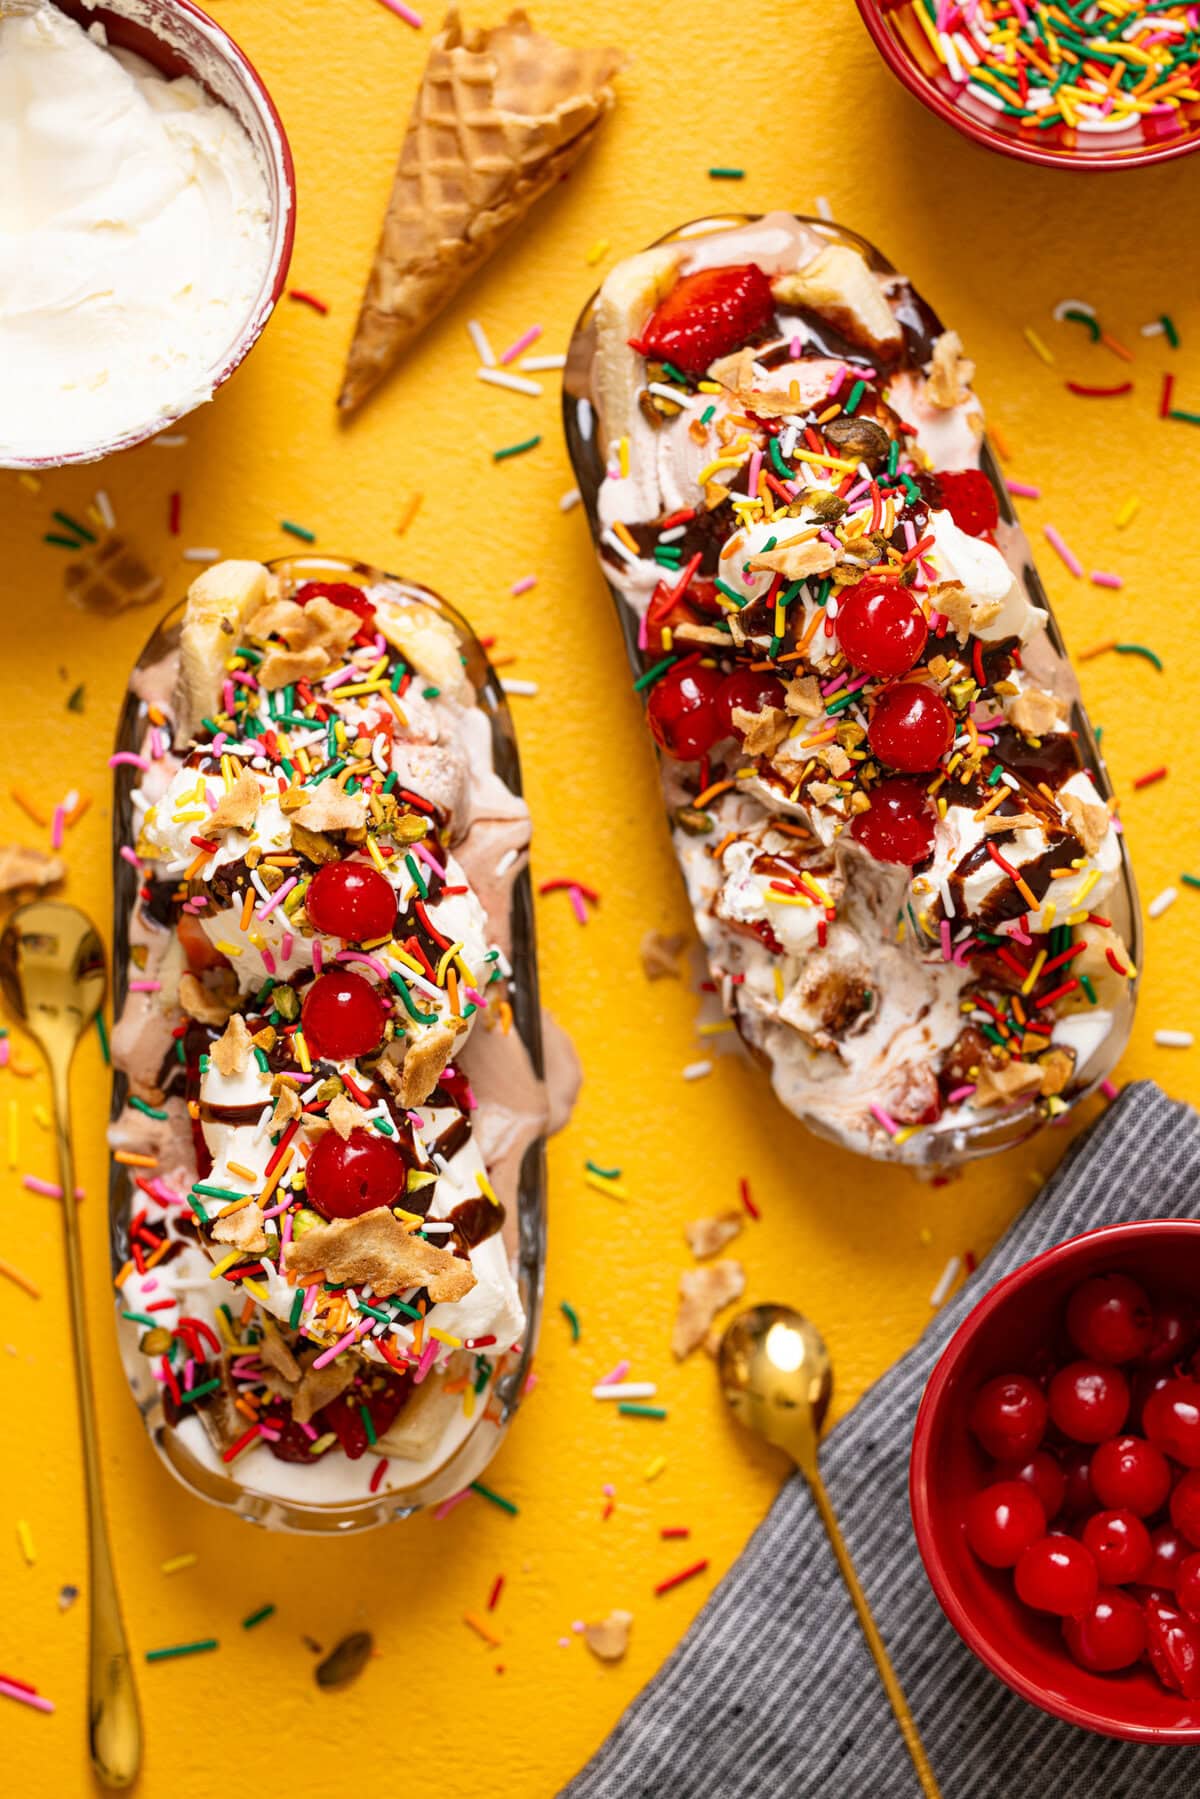 Overhead view of banana split on a yellow table with cherries, spoons, and cones.